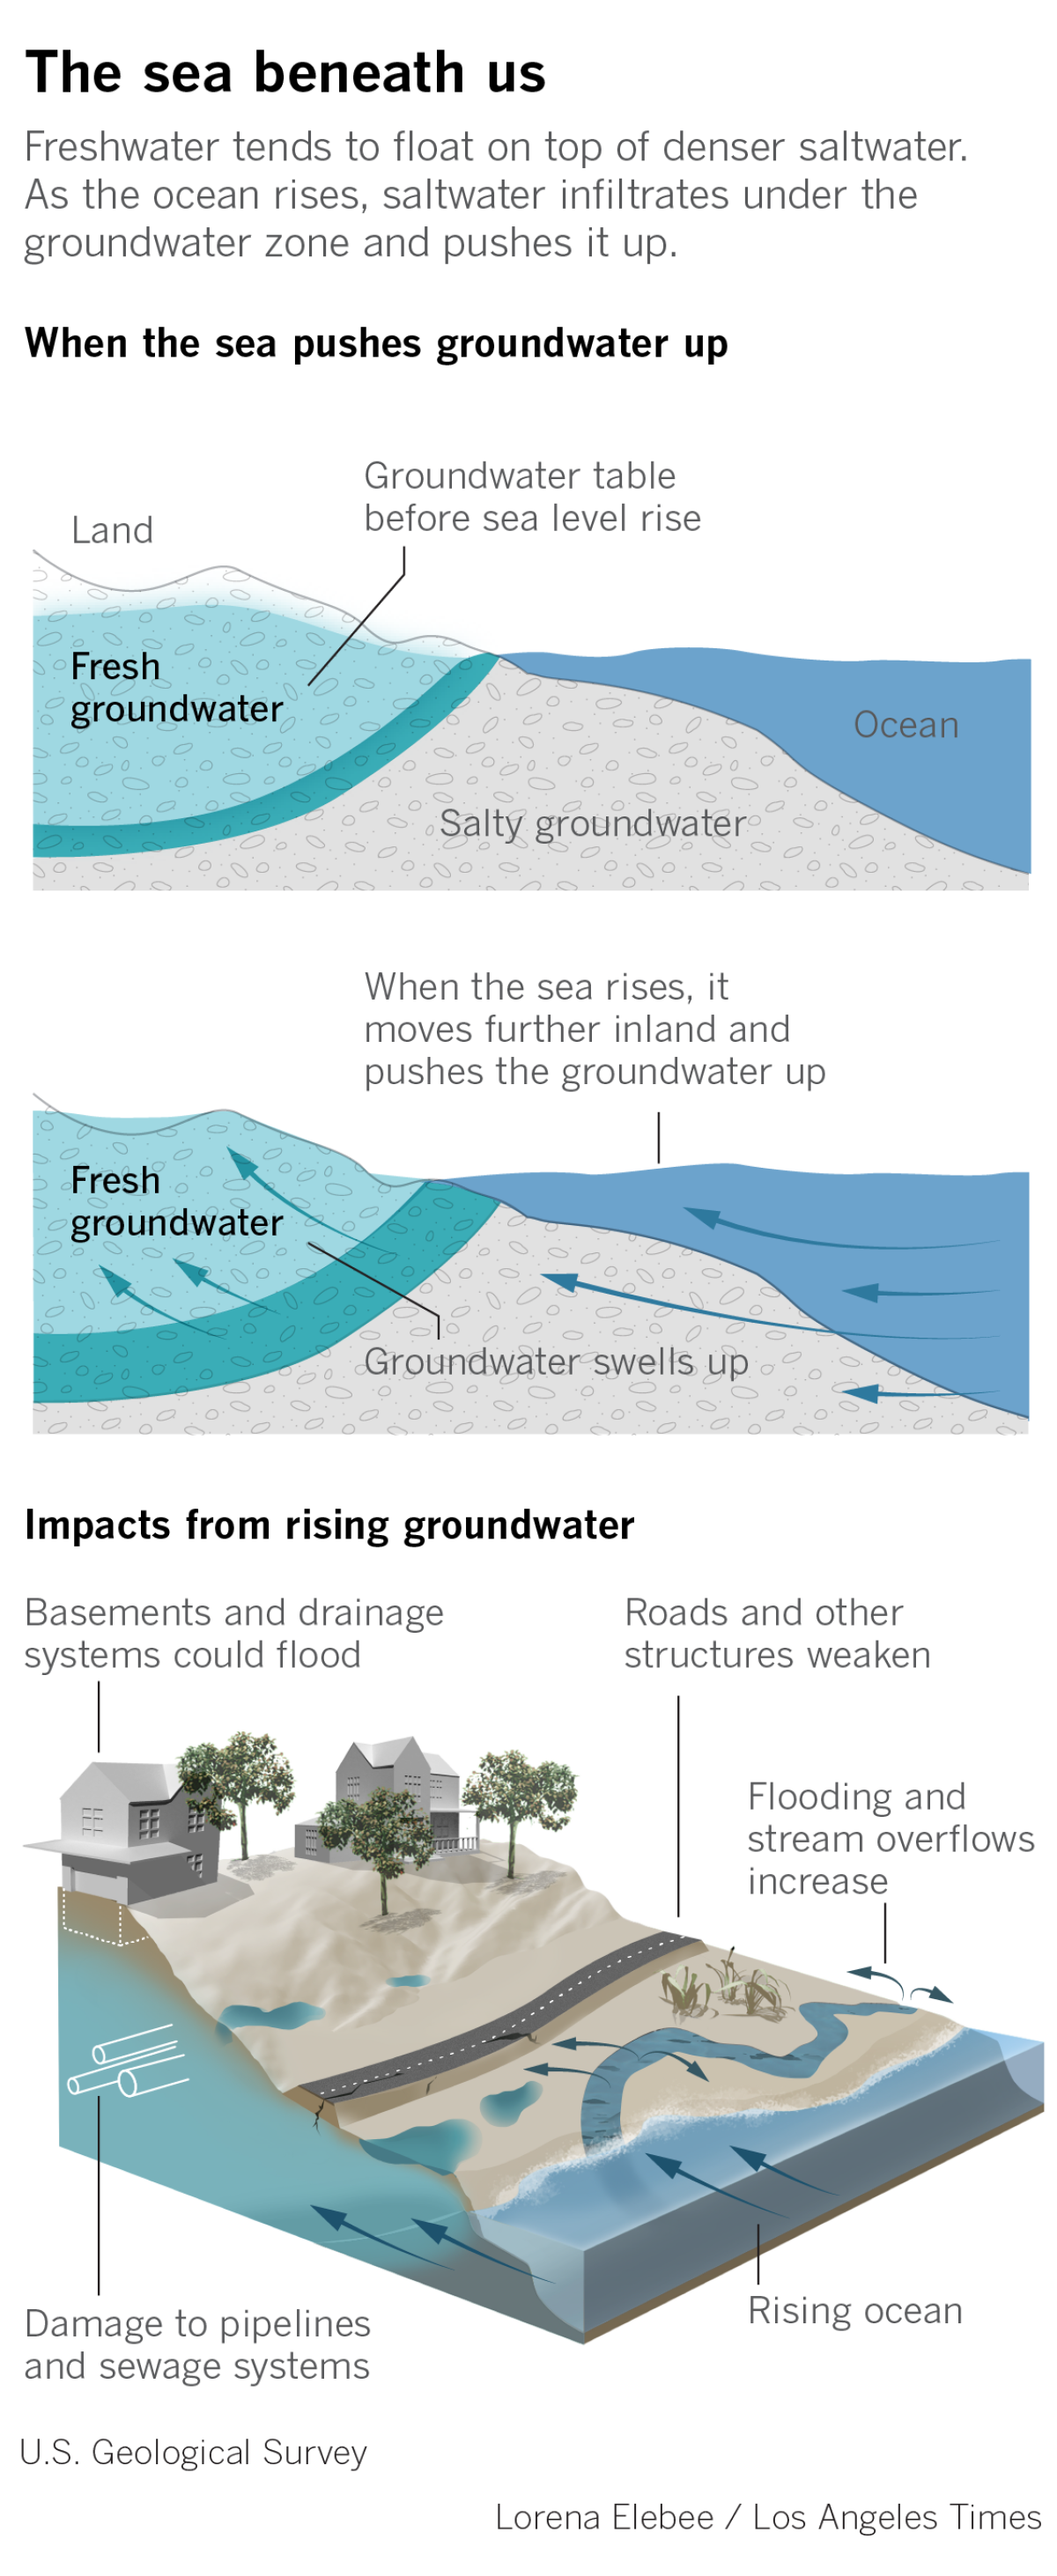 How sea-level rise pushes groundwater up to the surface and impacts drainage, basements, roads and streams.